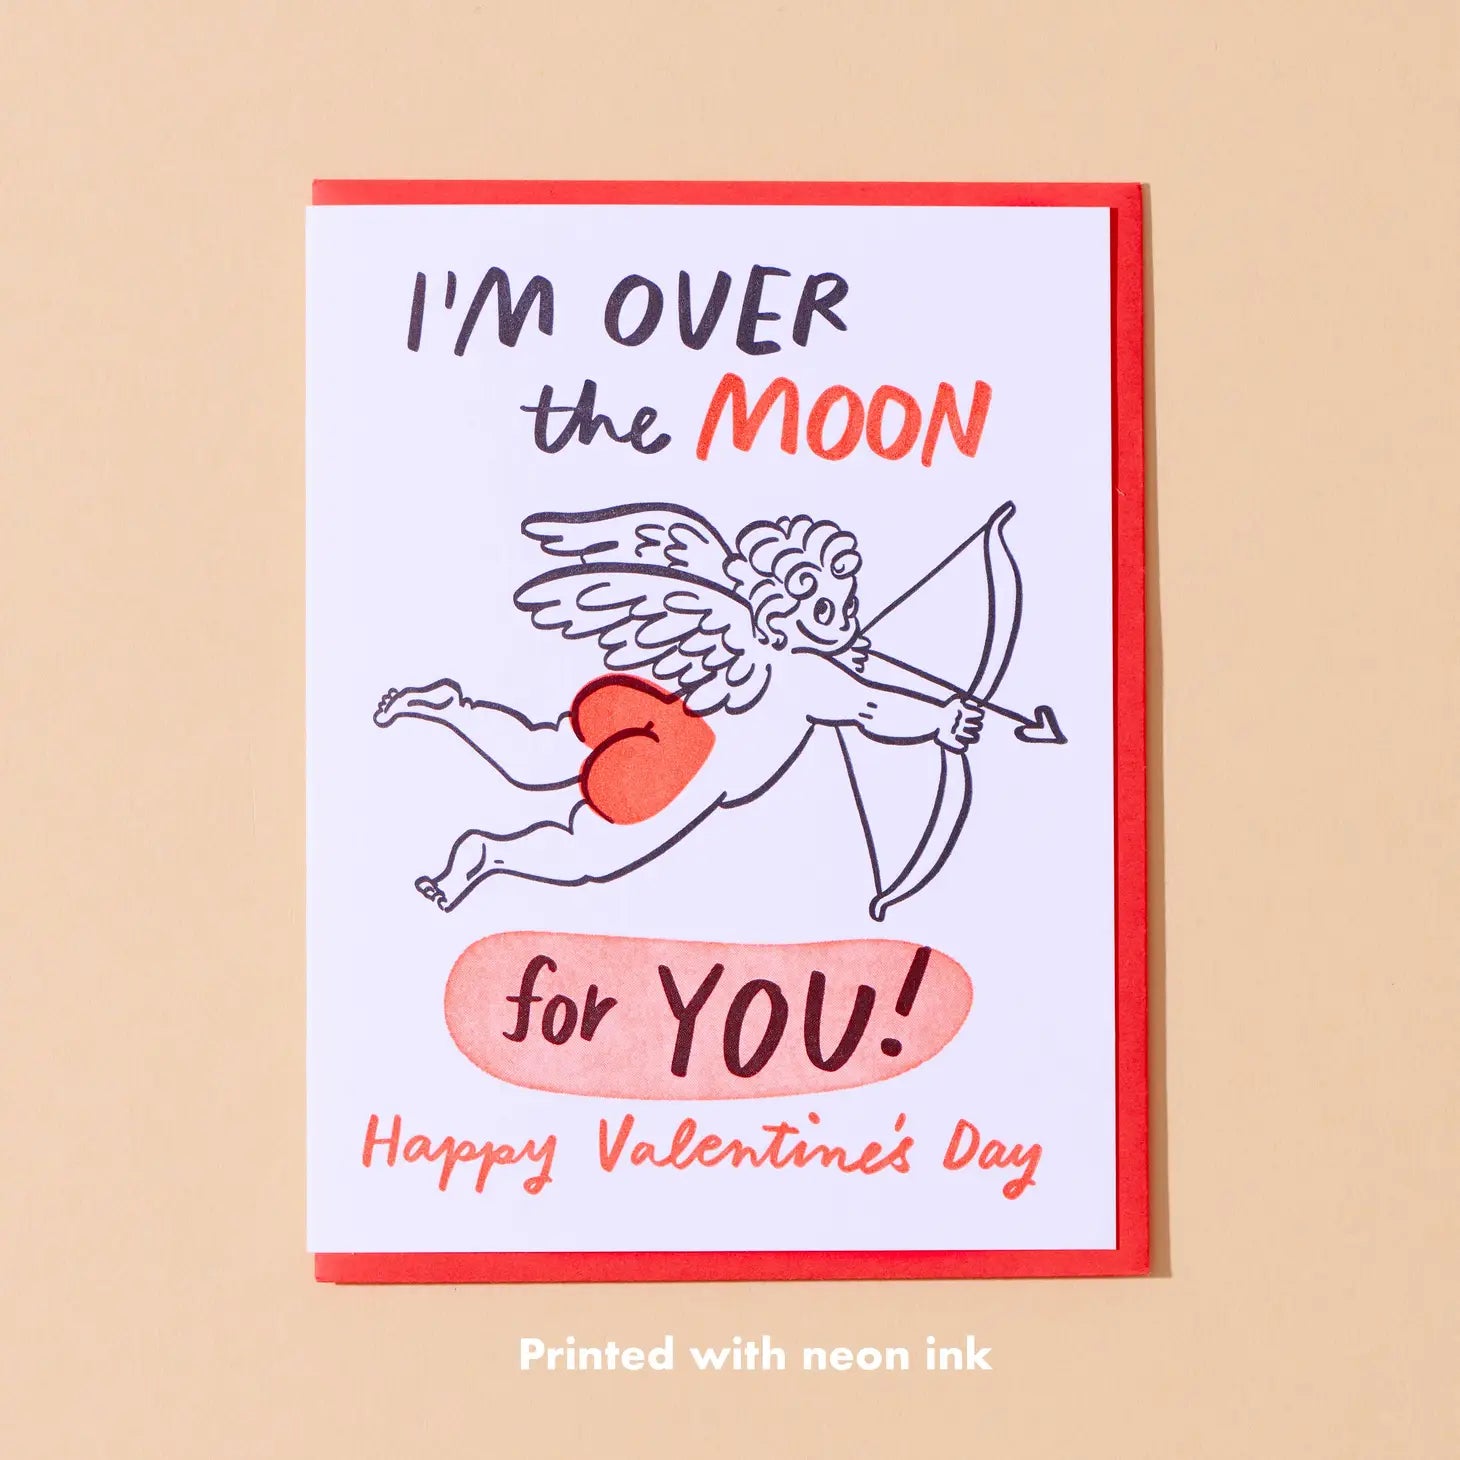 Over the Moon Letterpress card